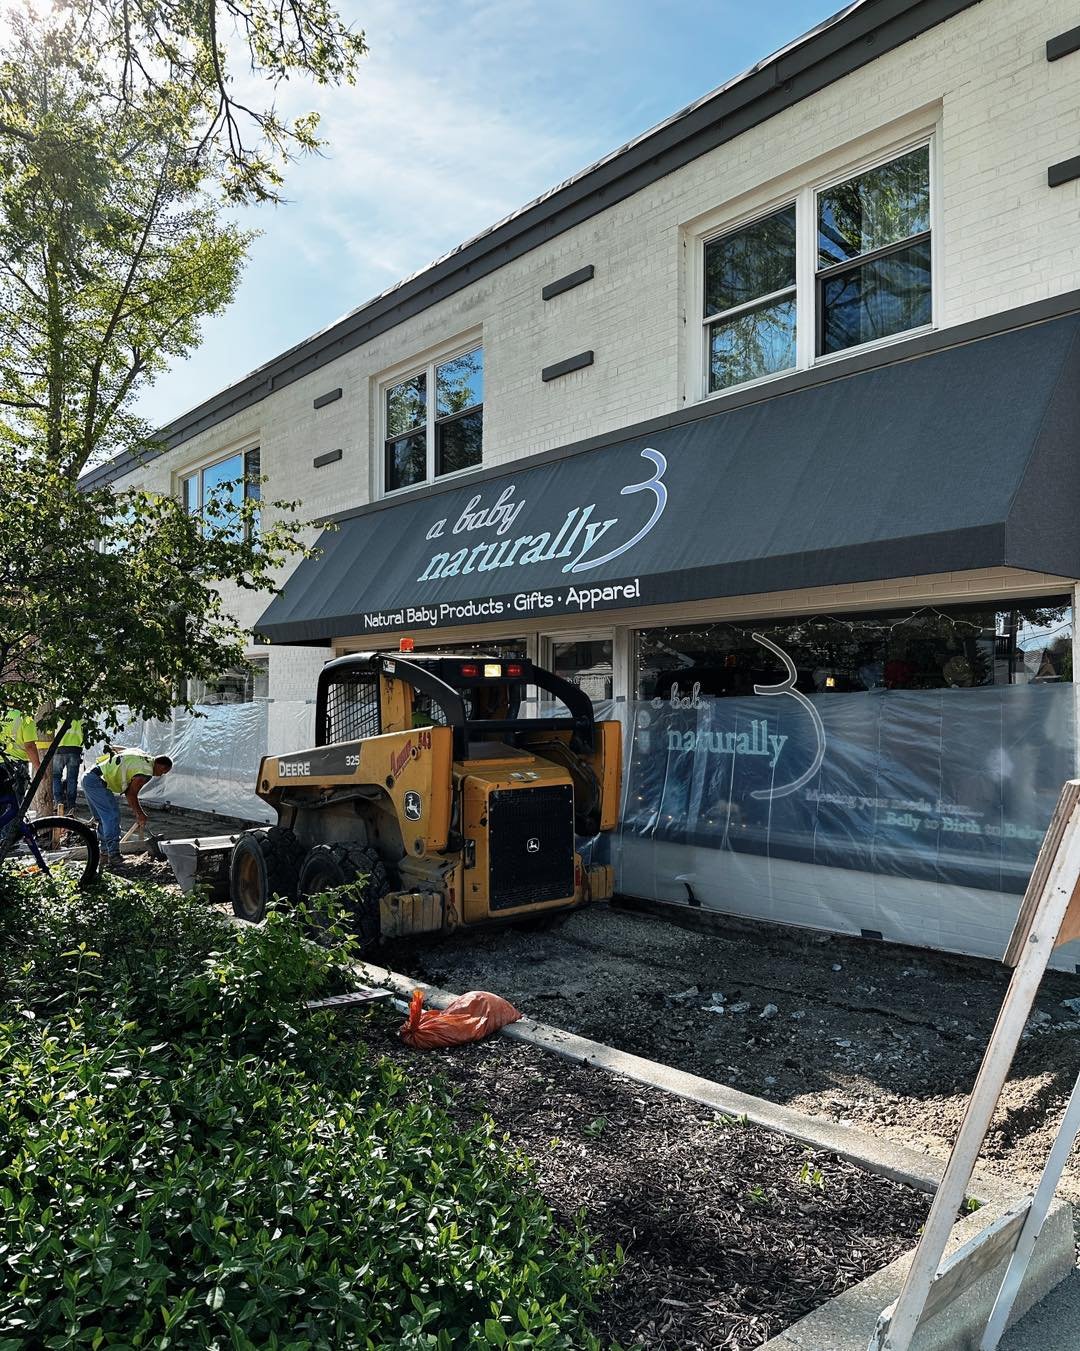 Please read! 

The city is re-pouring the sidewalk today, please plan to use our side door off of Hale Street. We will be open our regular hours 10 AM - 5 PM. 

Thank you for your patience during this project.